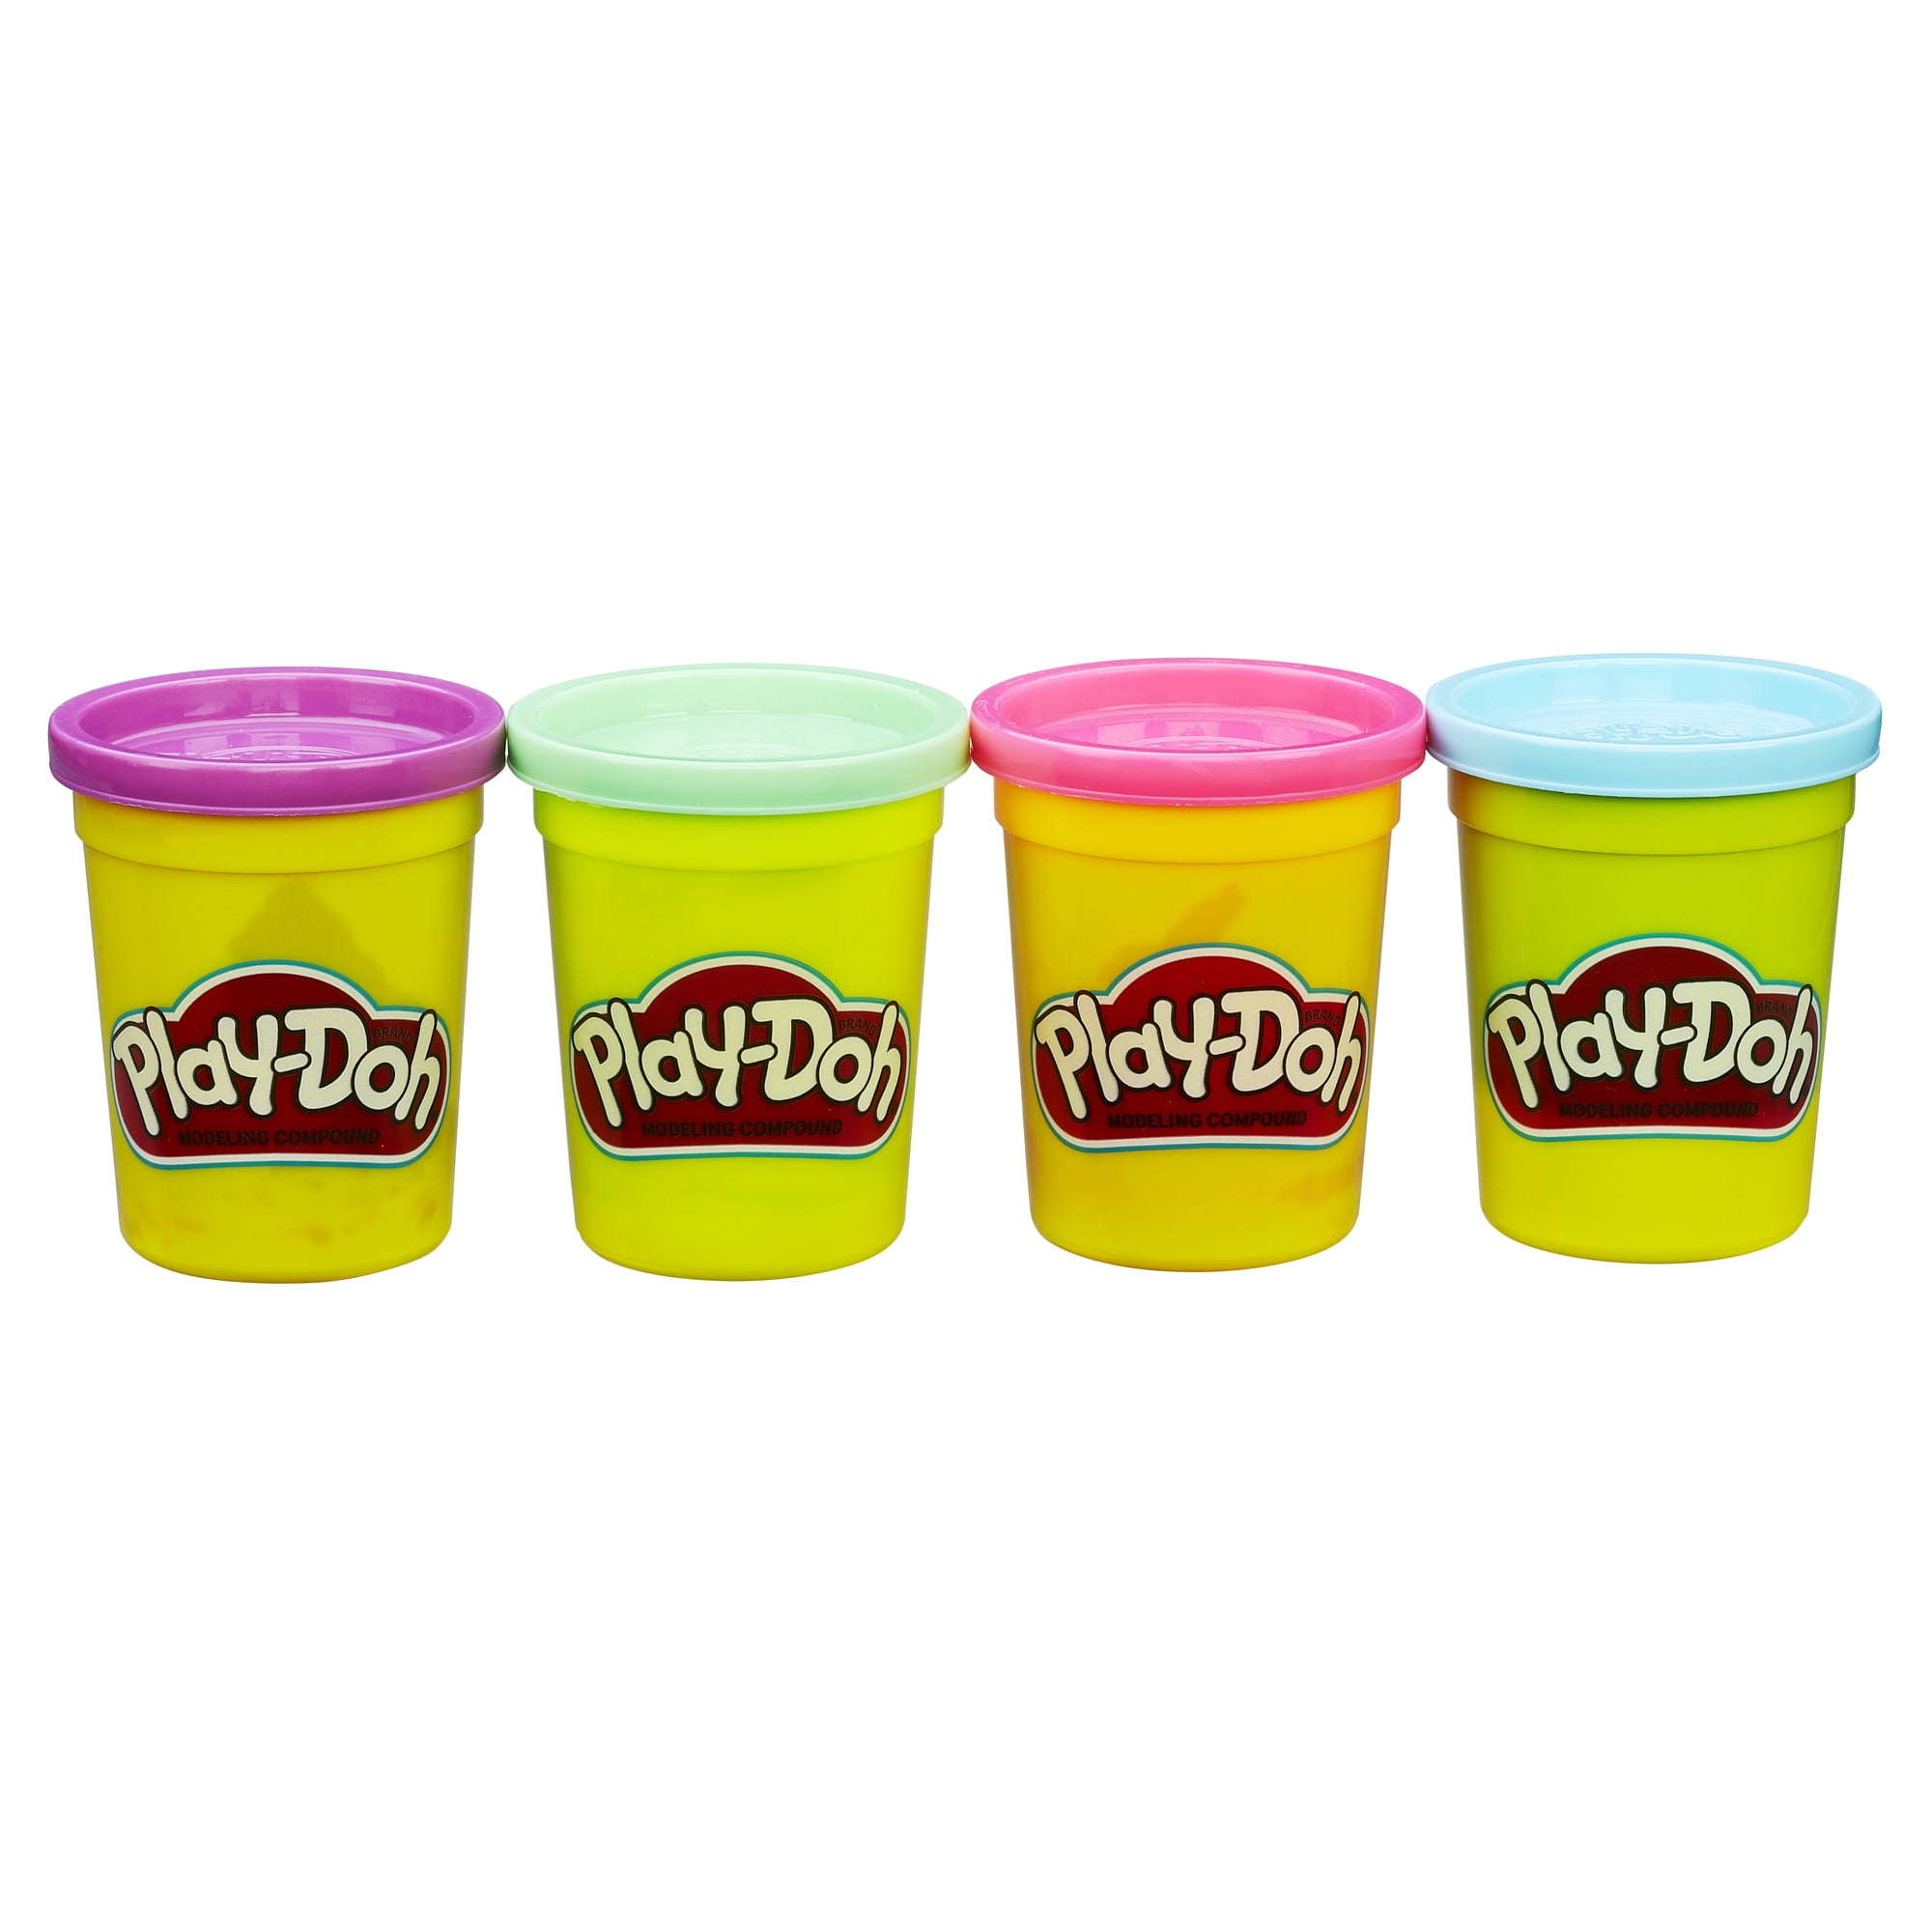 Play-Doh Elastix Compound 4-Pack of Bold Colors 